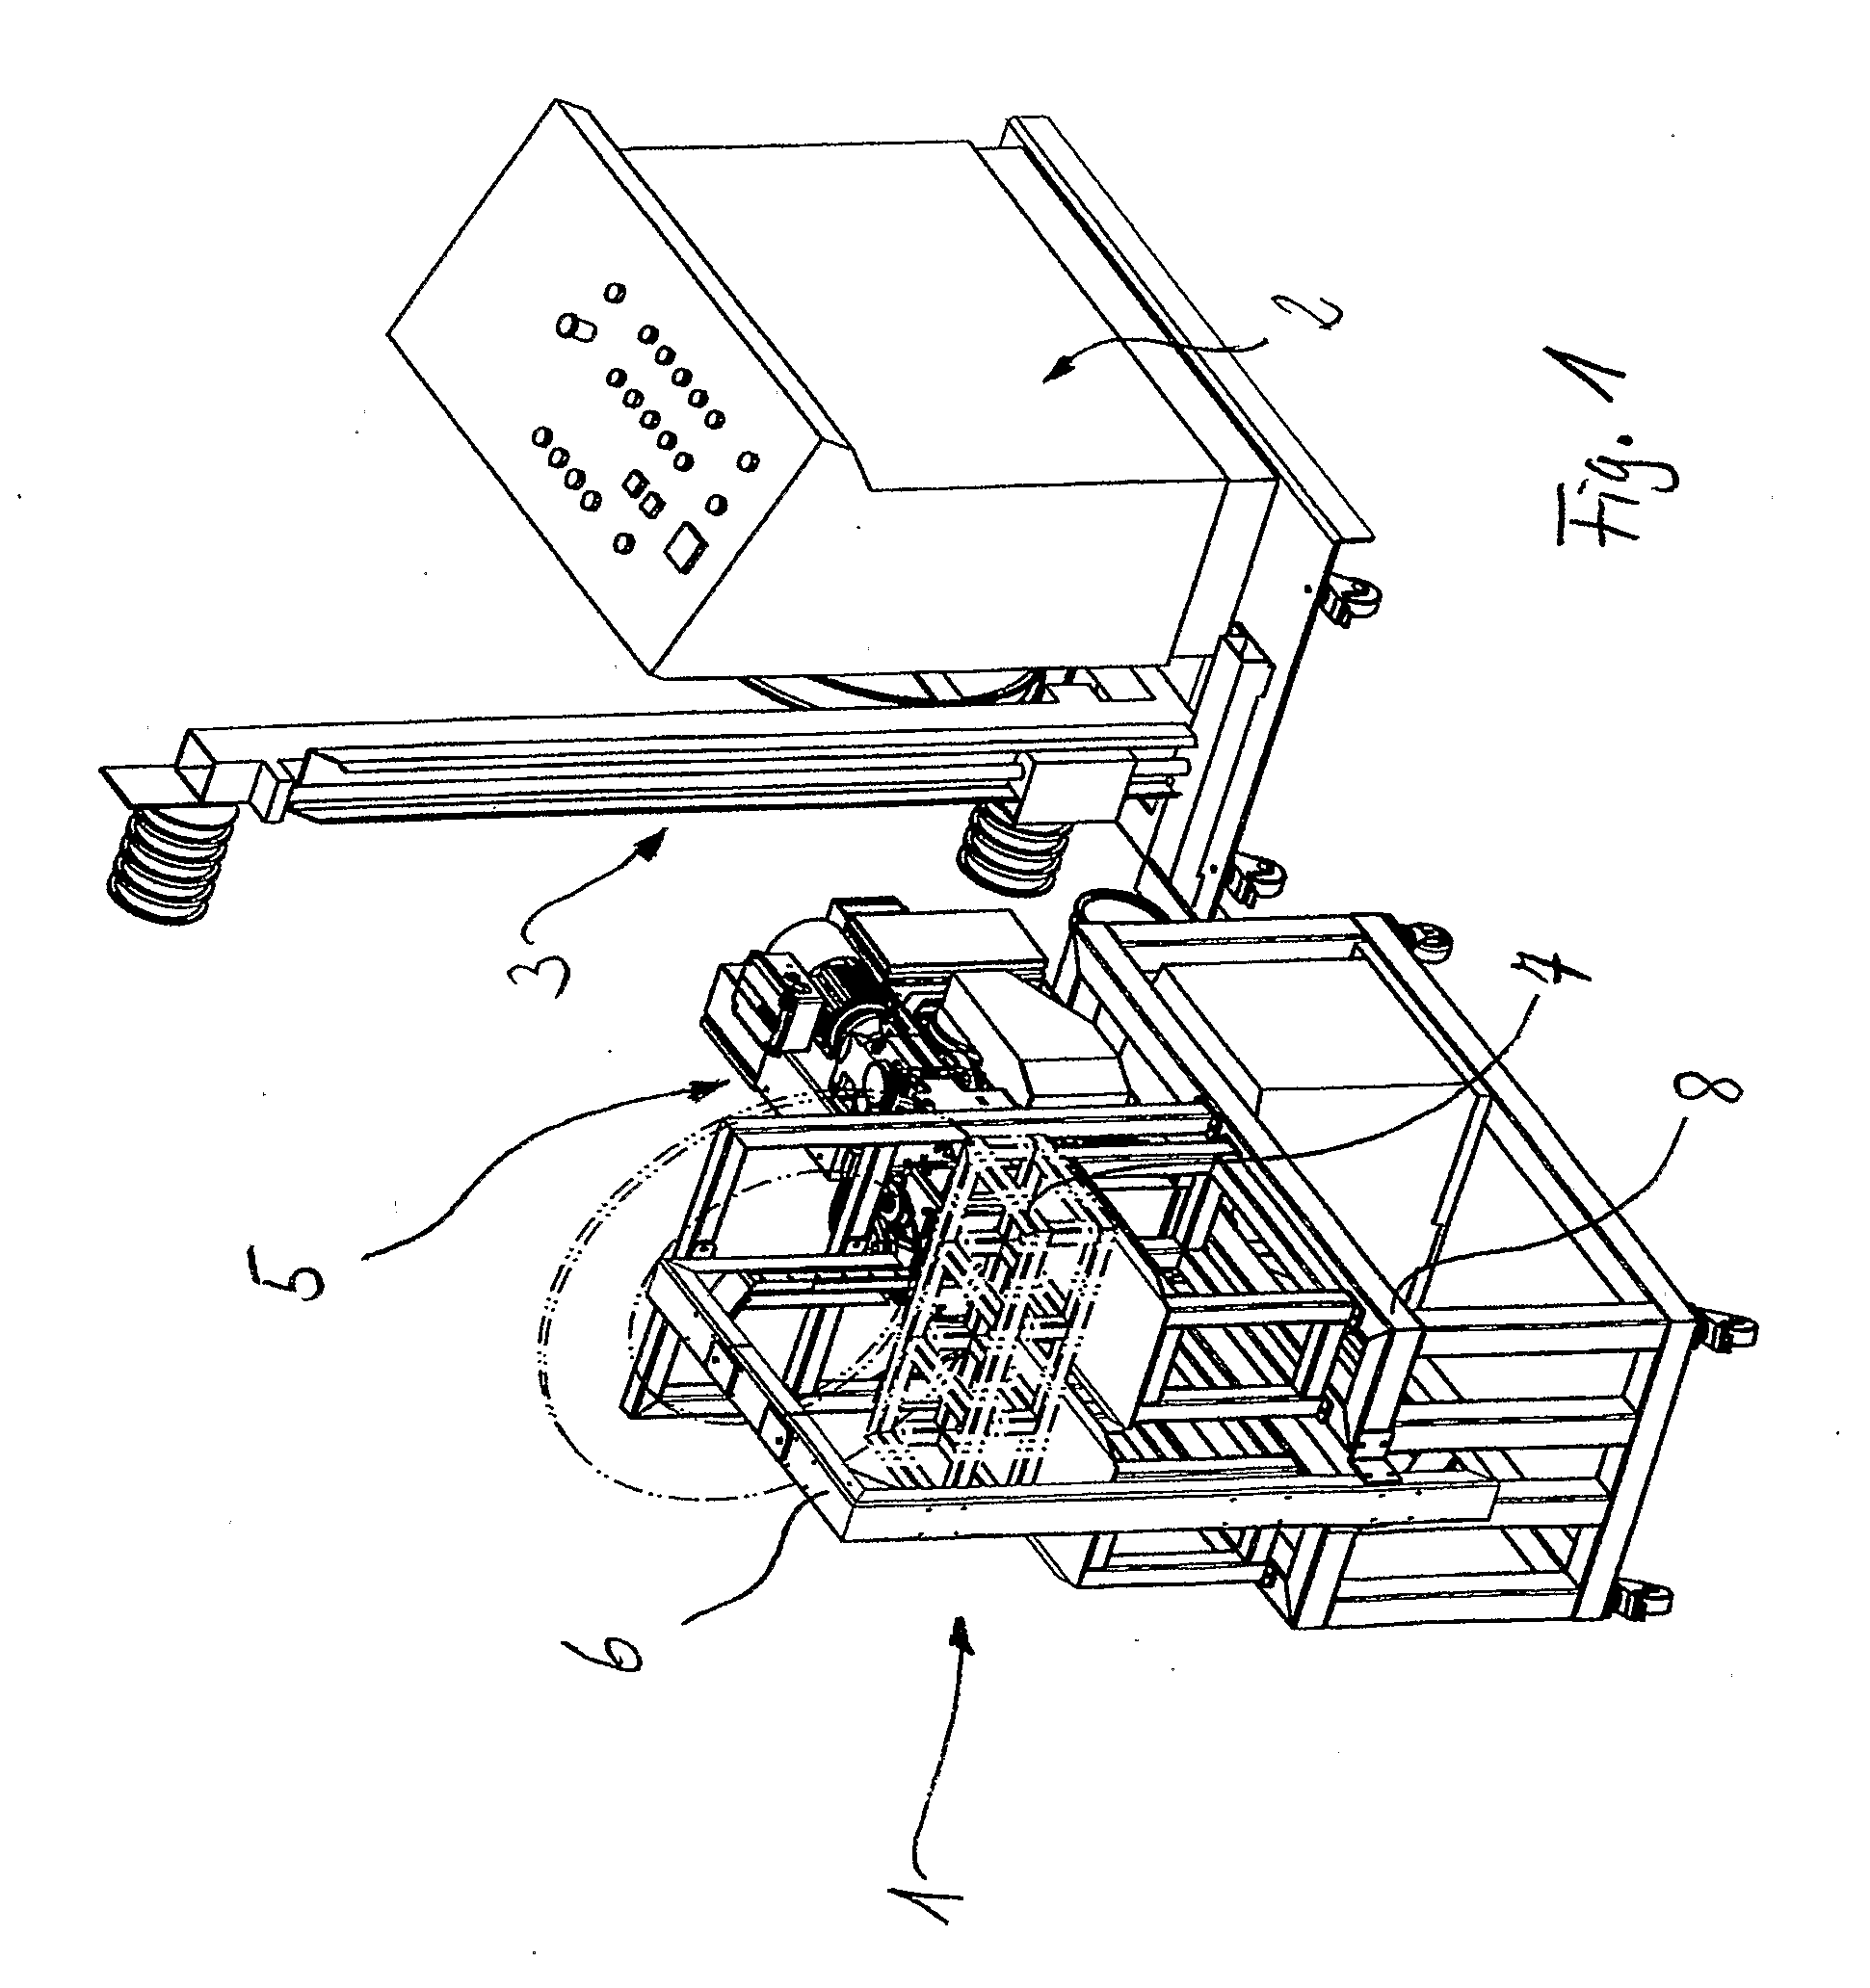 Method and Device for Strapping Goods